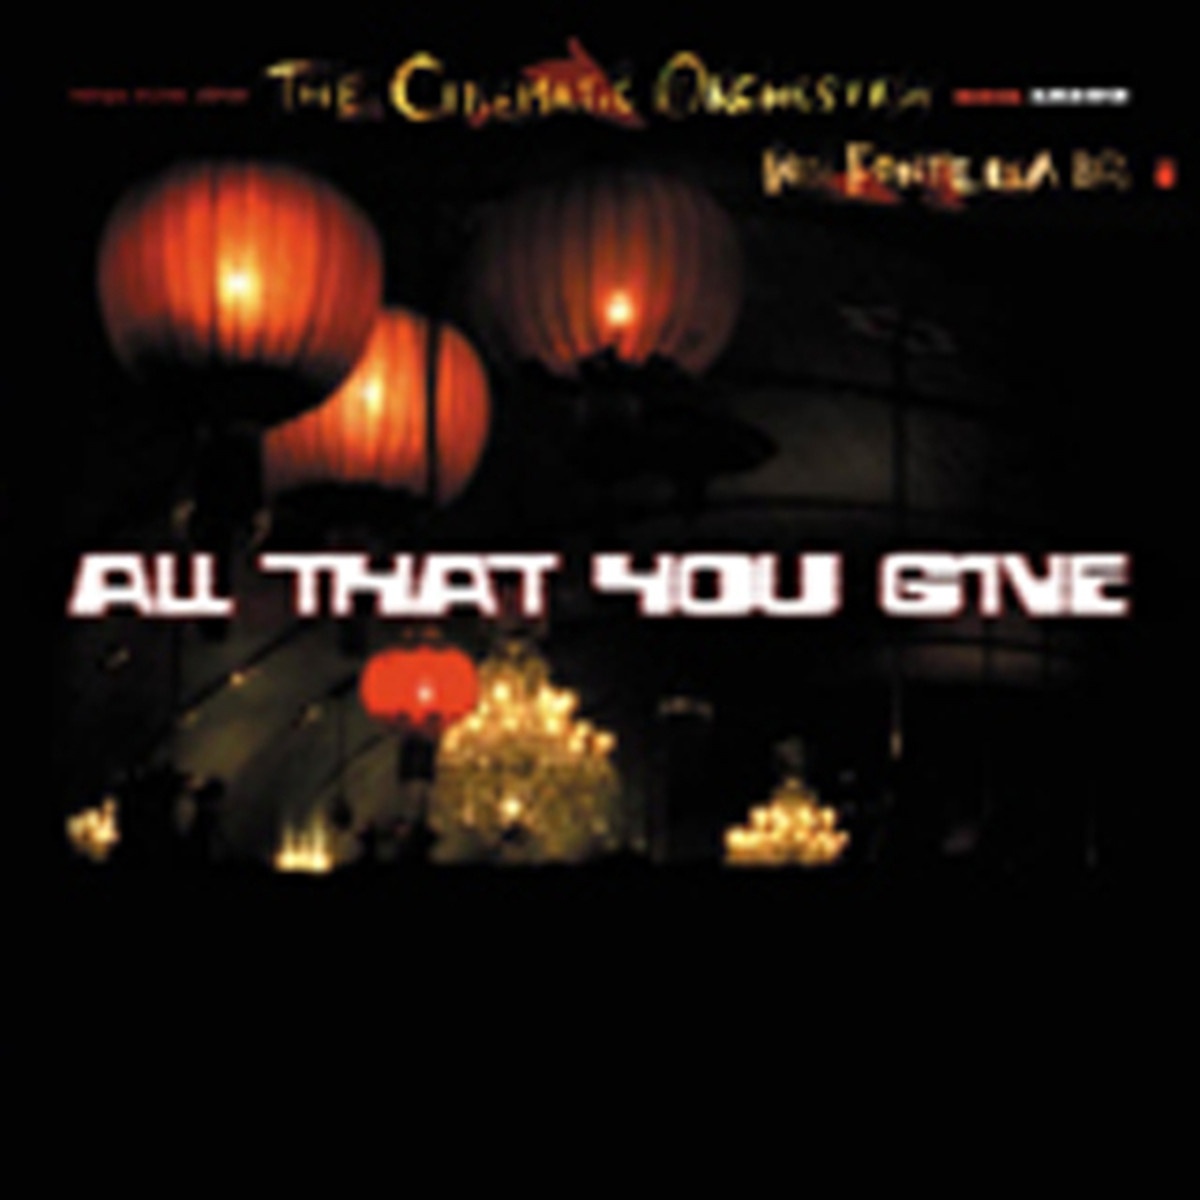 All That You Give (Herbert's Raving Mix)